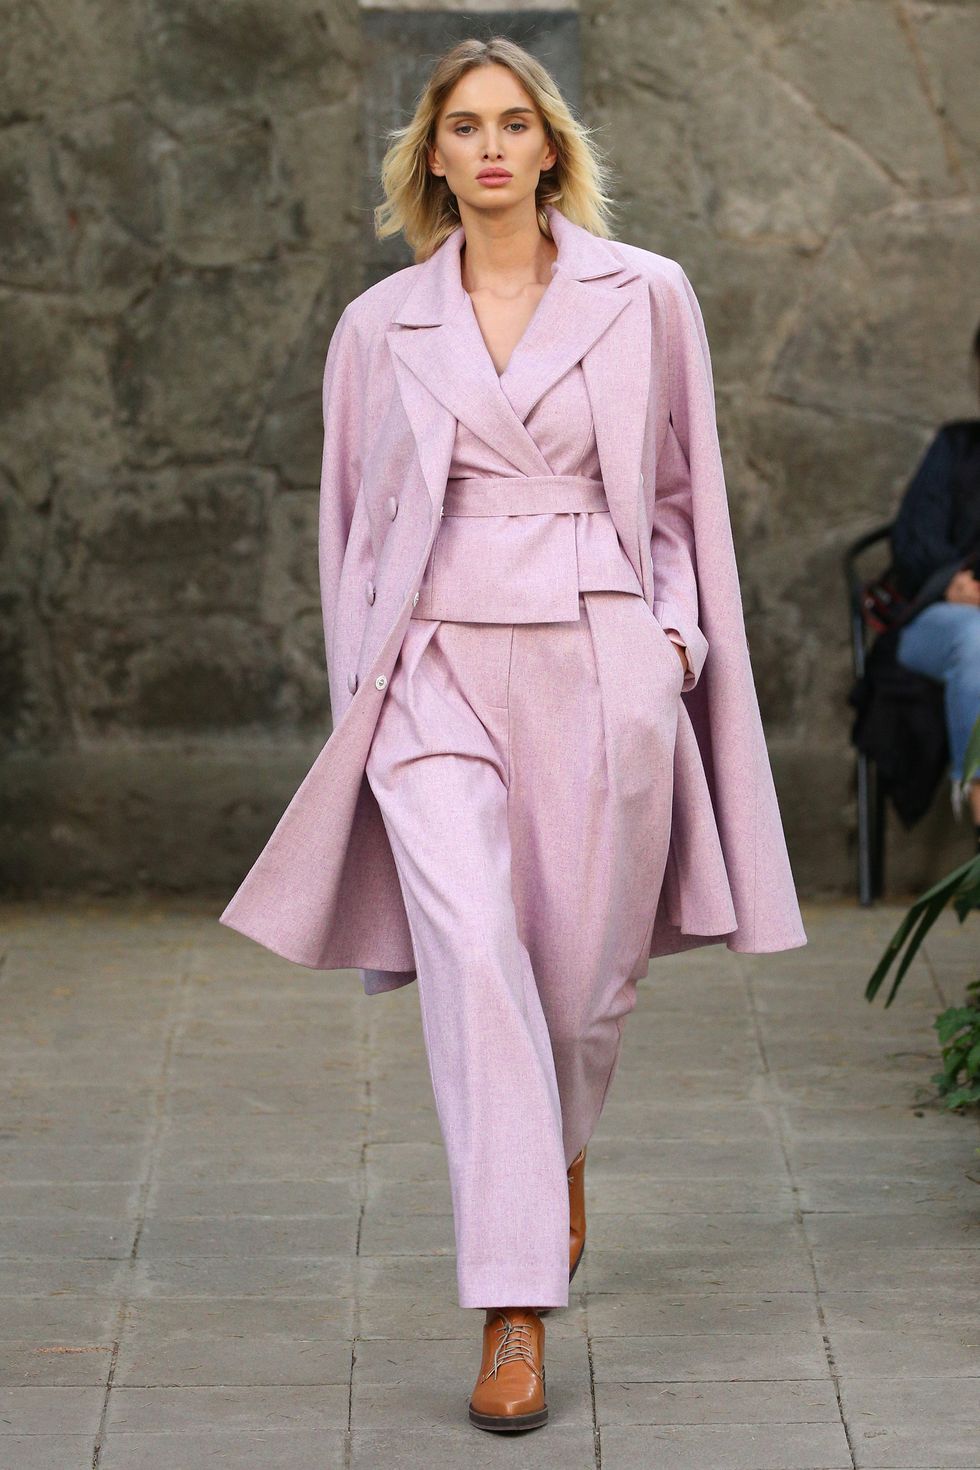 Fashion, Clothing, Fashion model, Fashion show, Runway, Pink, Pantsuit, Haute couture, Spring, Outerwear, 